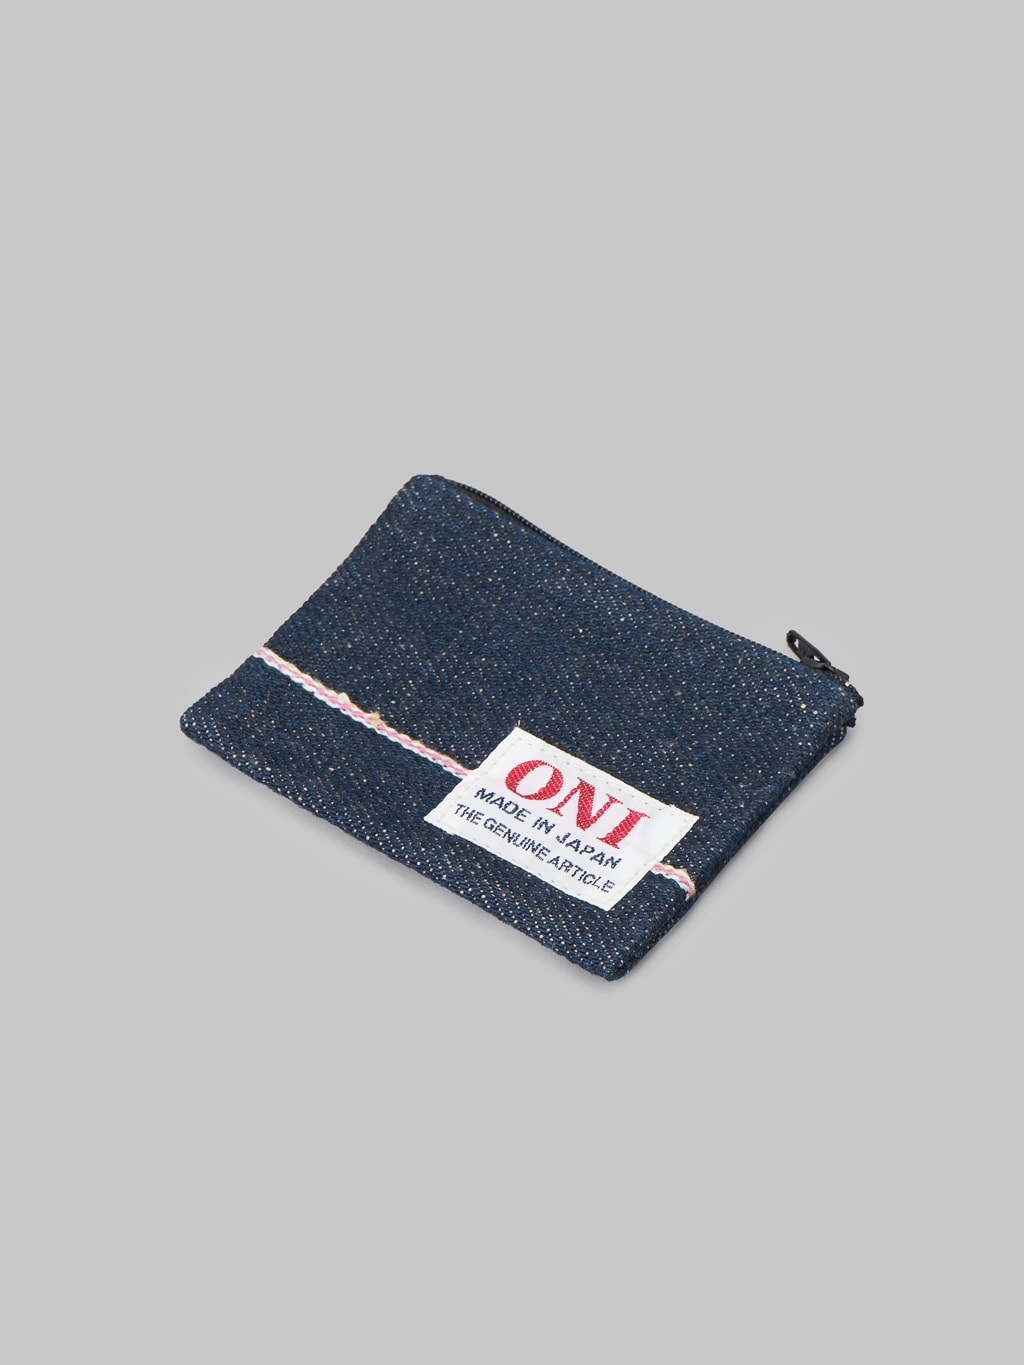 Oni Denim Selvedge coin pouch front view